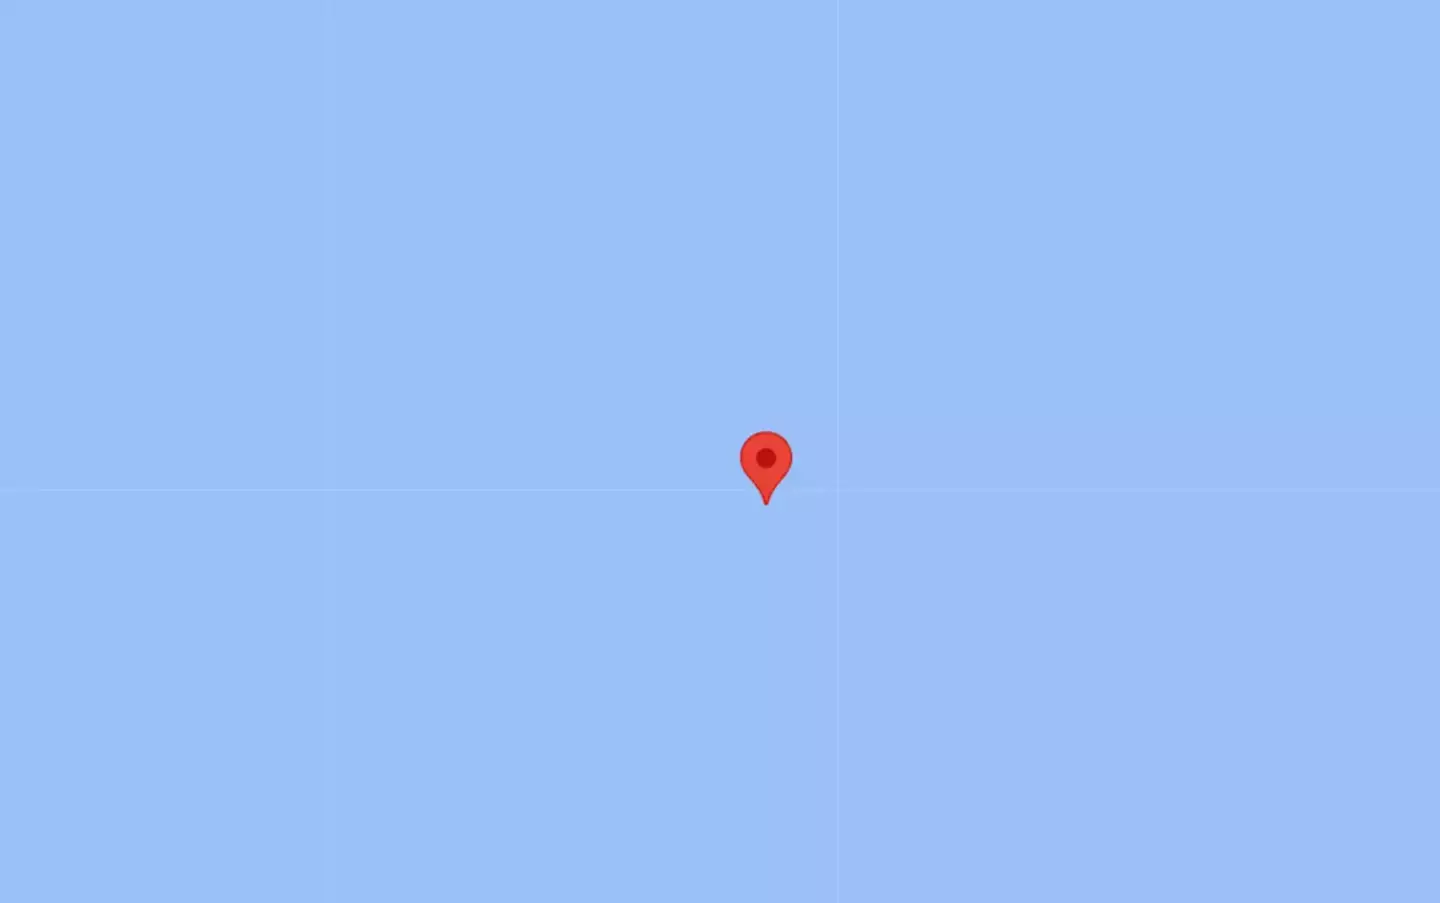 Point Nemo is smack bang in the middle of the Pacific Ocean.